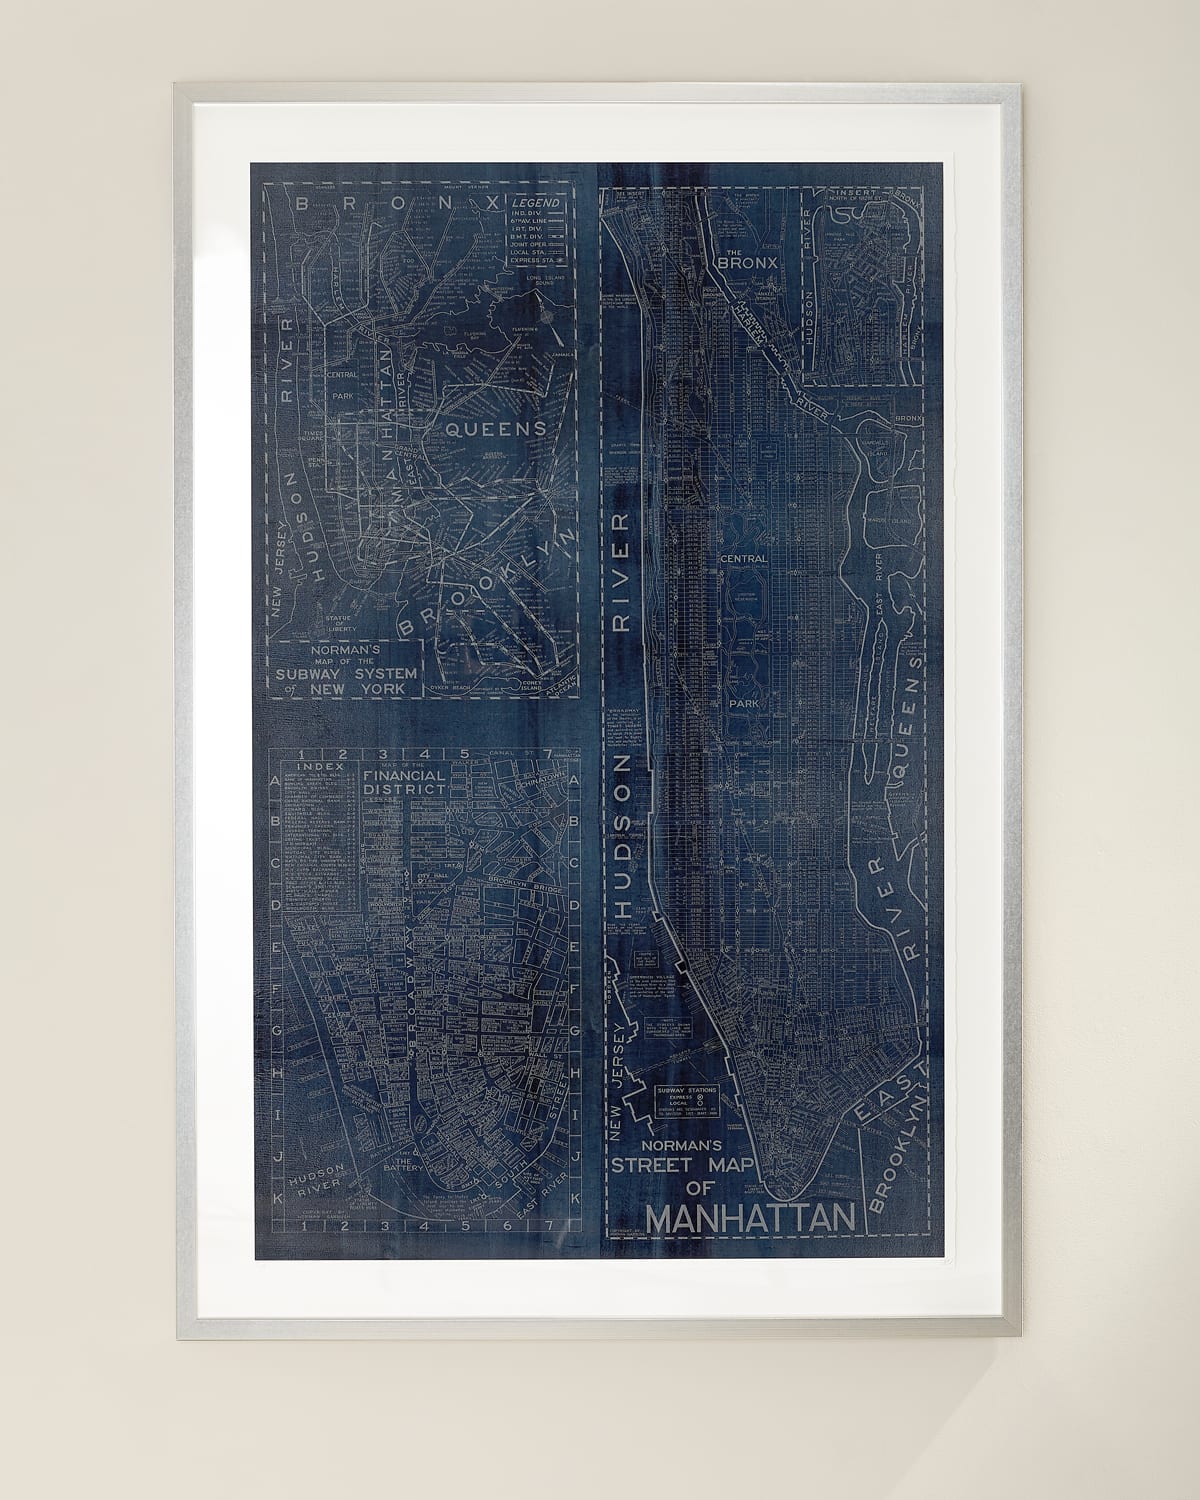 Manhattan Limited Edition [100x] Torn Paper In Silver Gallery Frame, Initialed And Numbered